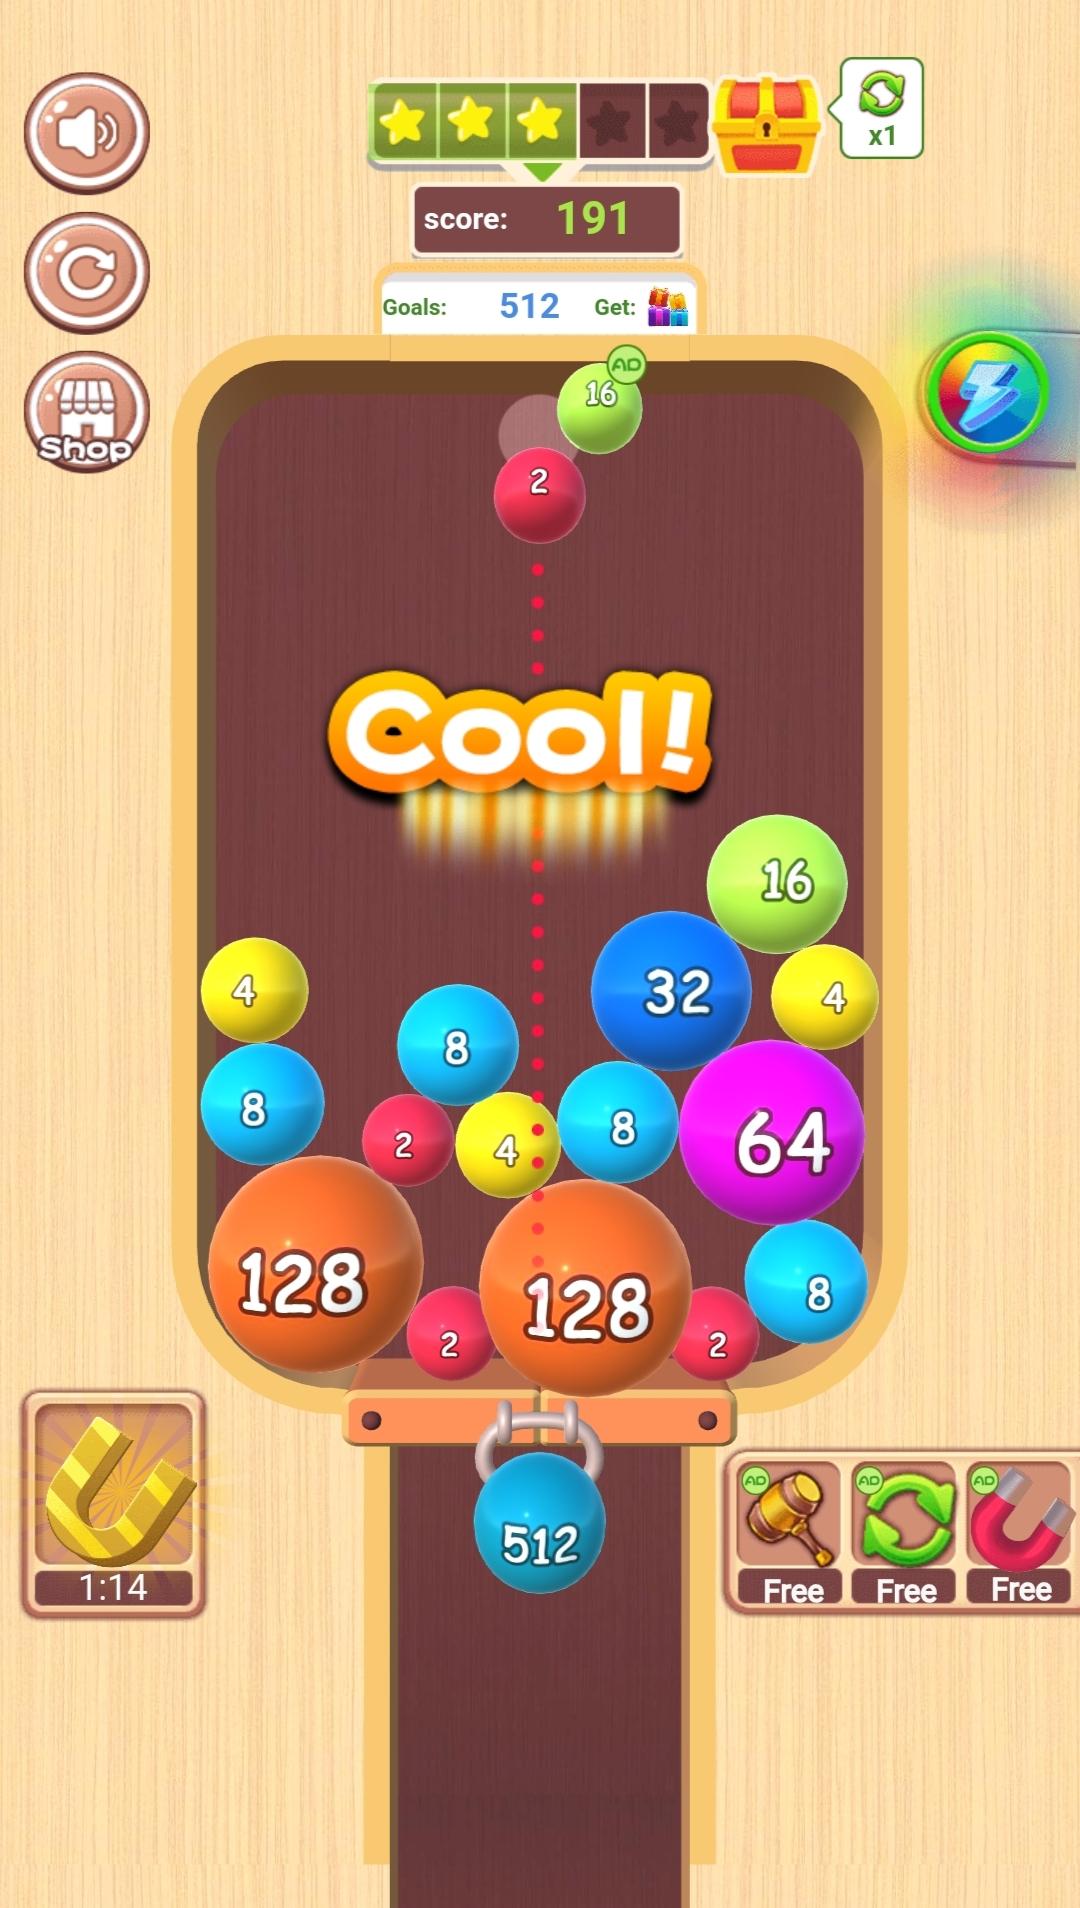 Бол Бастер. Bubble Buster 2048 Android 4.4 or later. Бравул пас на Бастер. A Buster on the balls. Ball busters